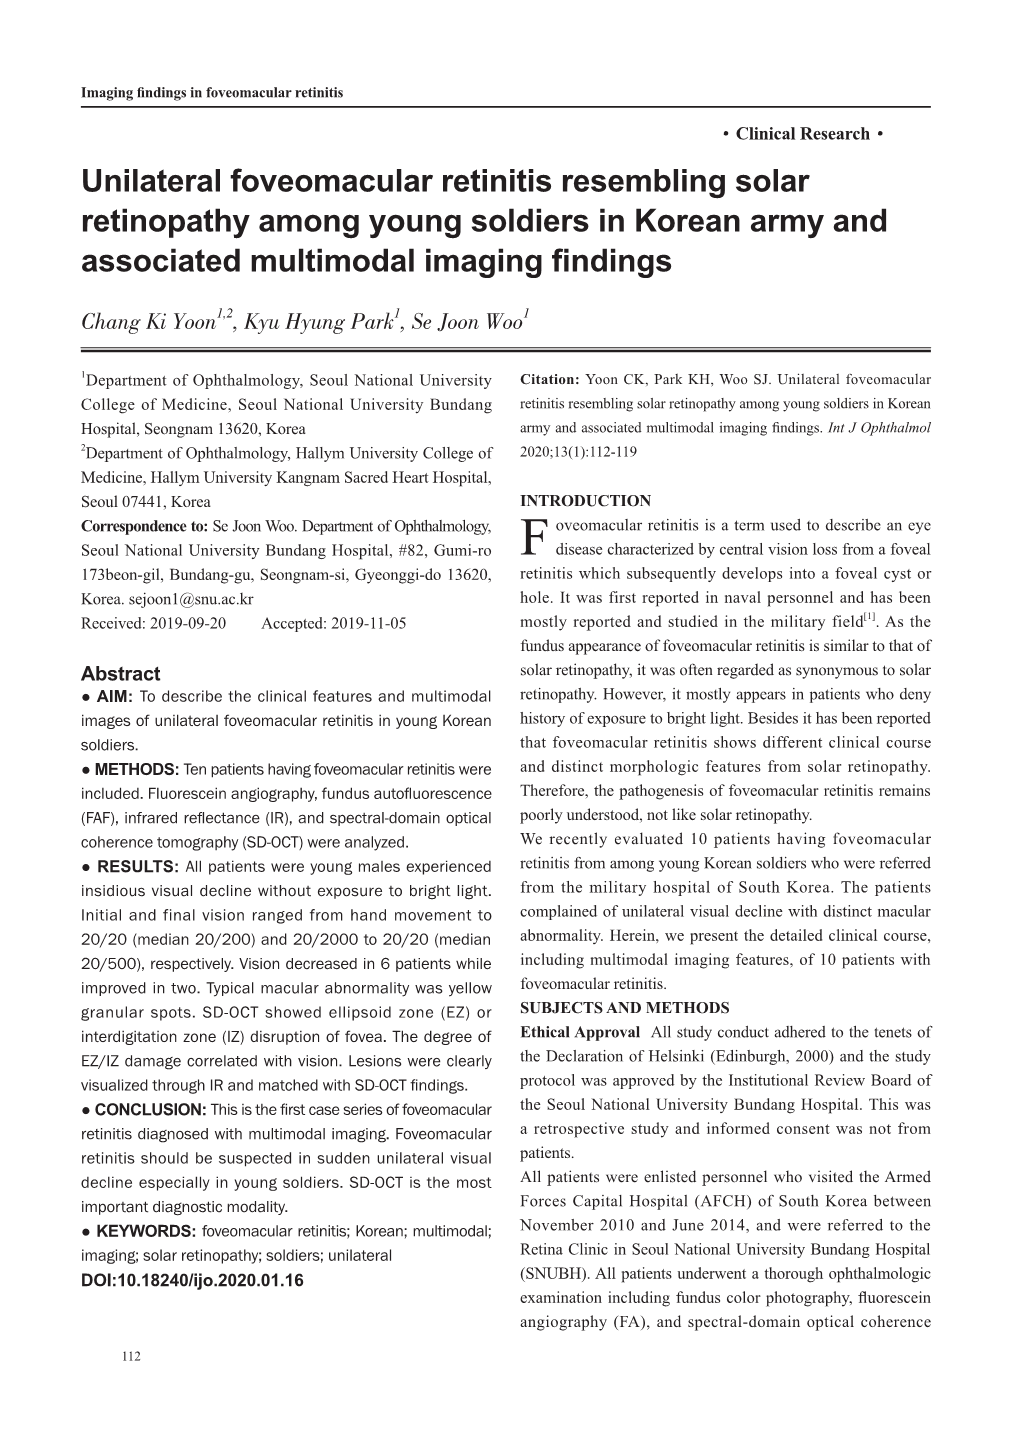 Unilateral Foveomacular Retinitis Resembling Solar Retinopathy Among Young Soldiers in Korean Army and Associated Multimodal Imaging Findings